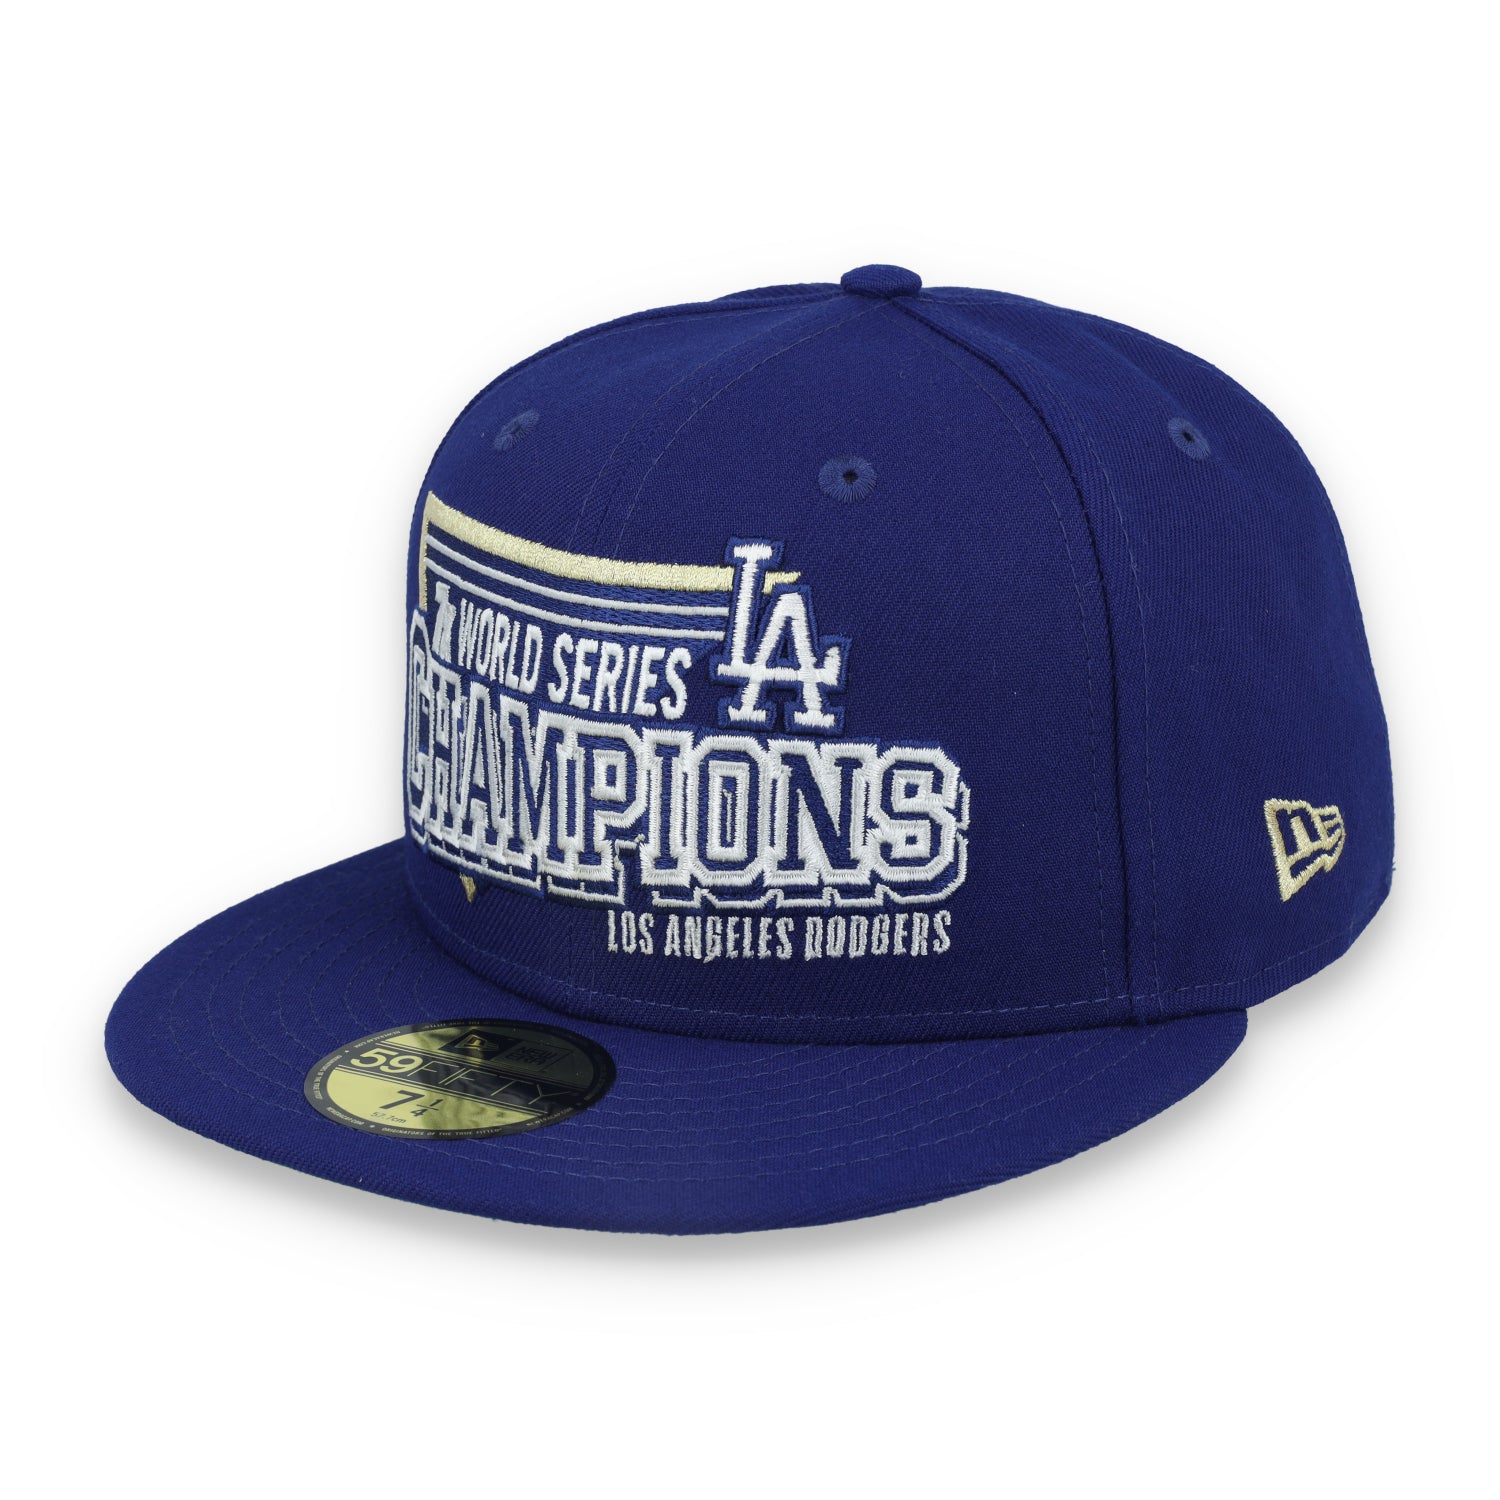 New Era Los Angeles Dodgers 7x Champions Throwback 59FIFTY Fitted Hat